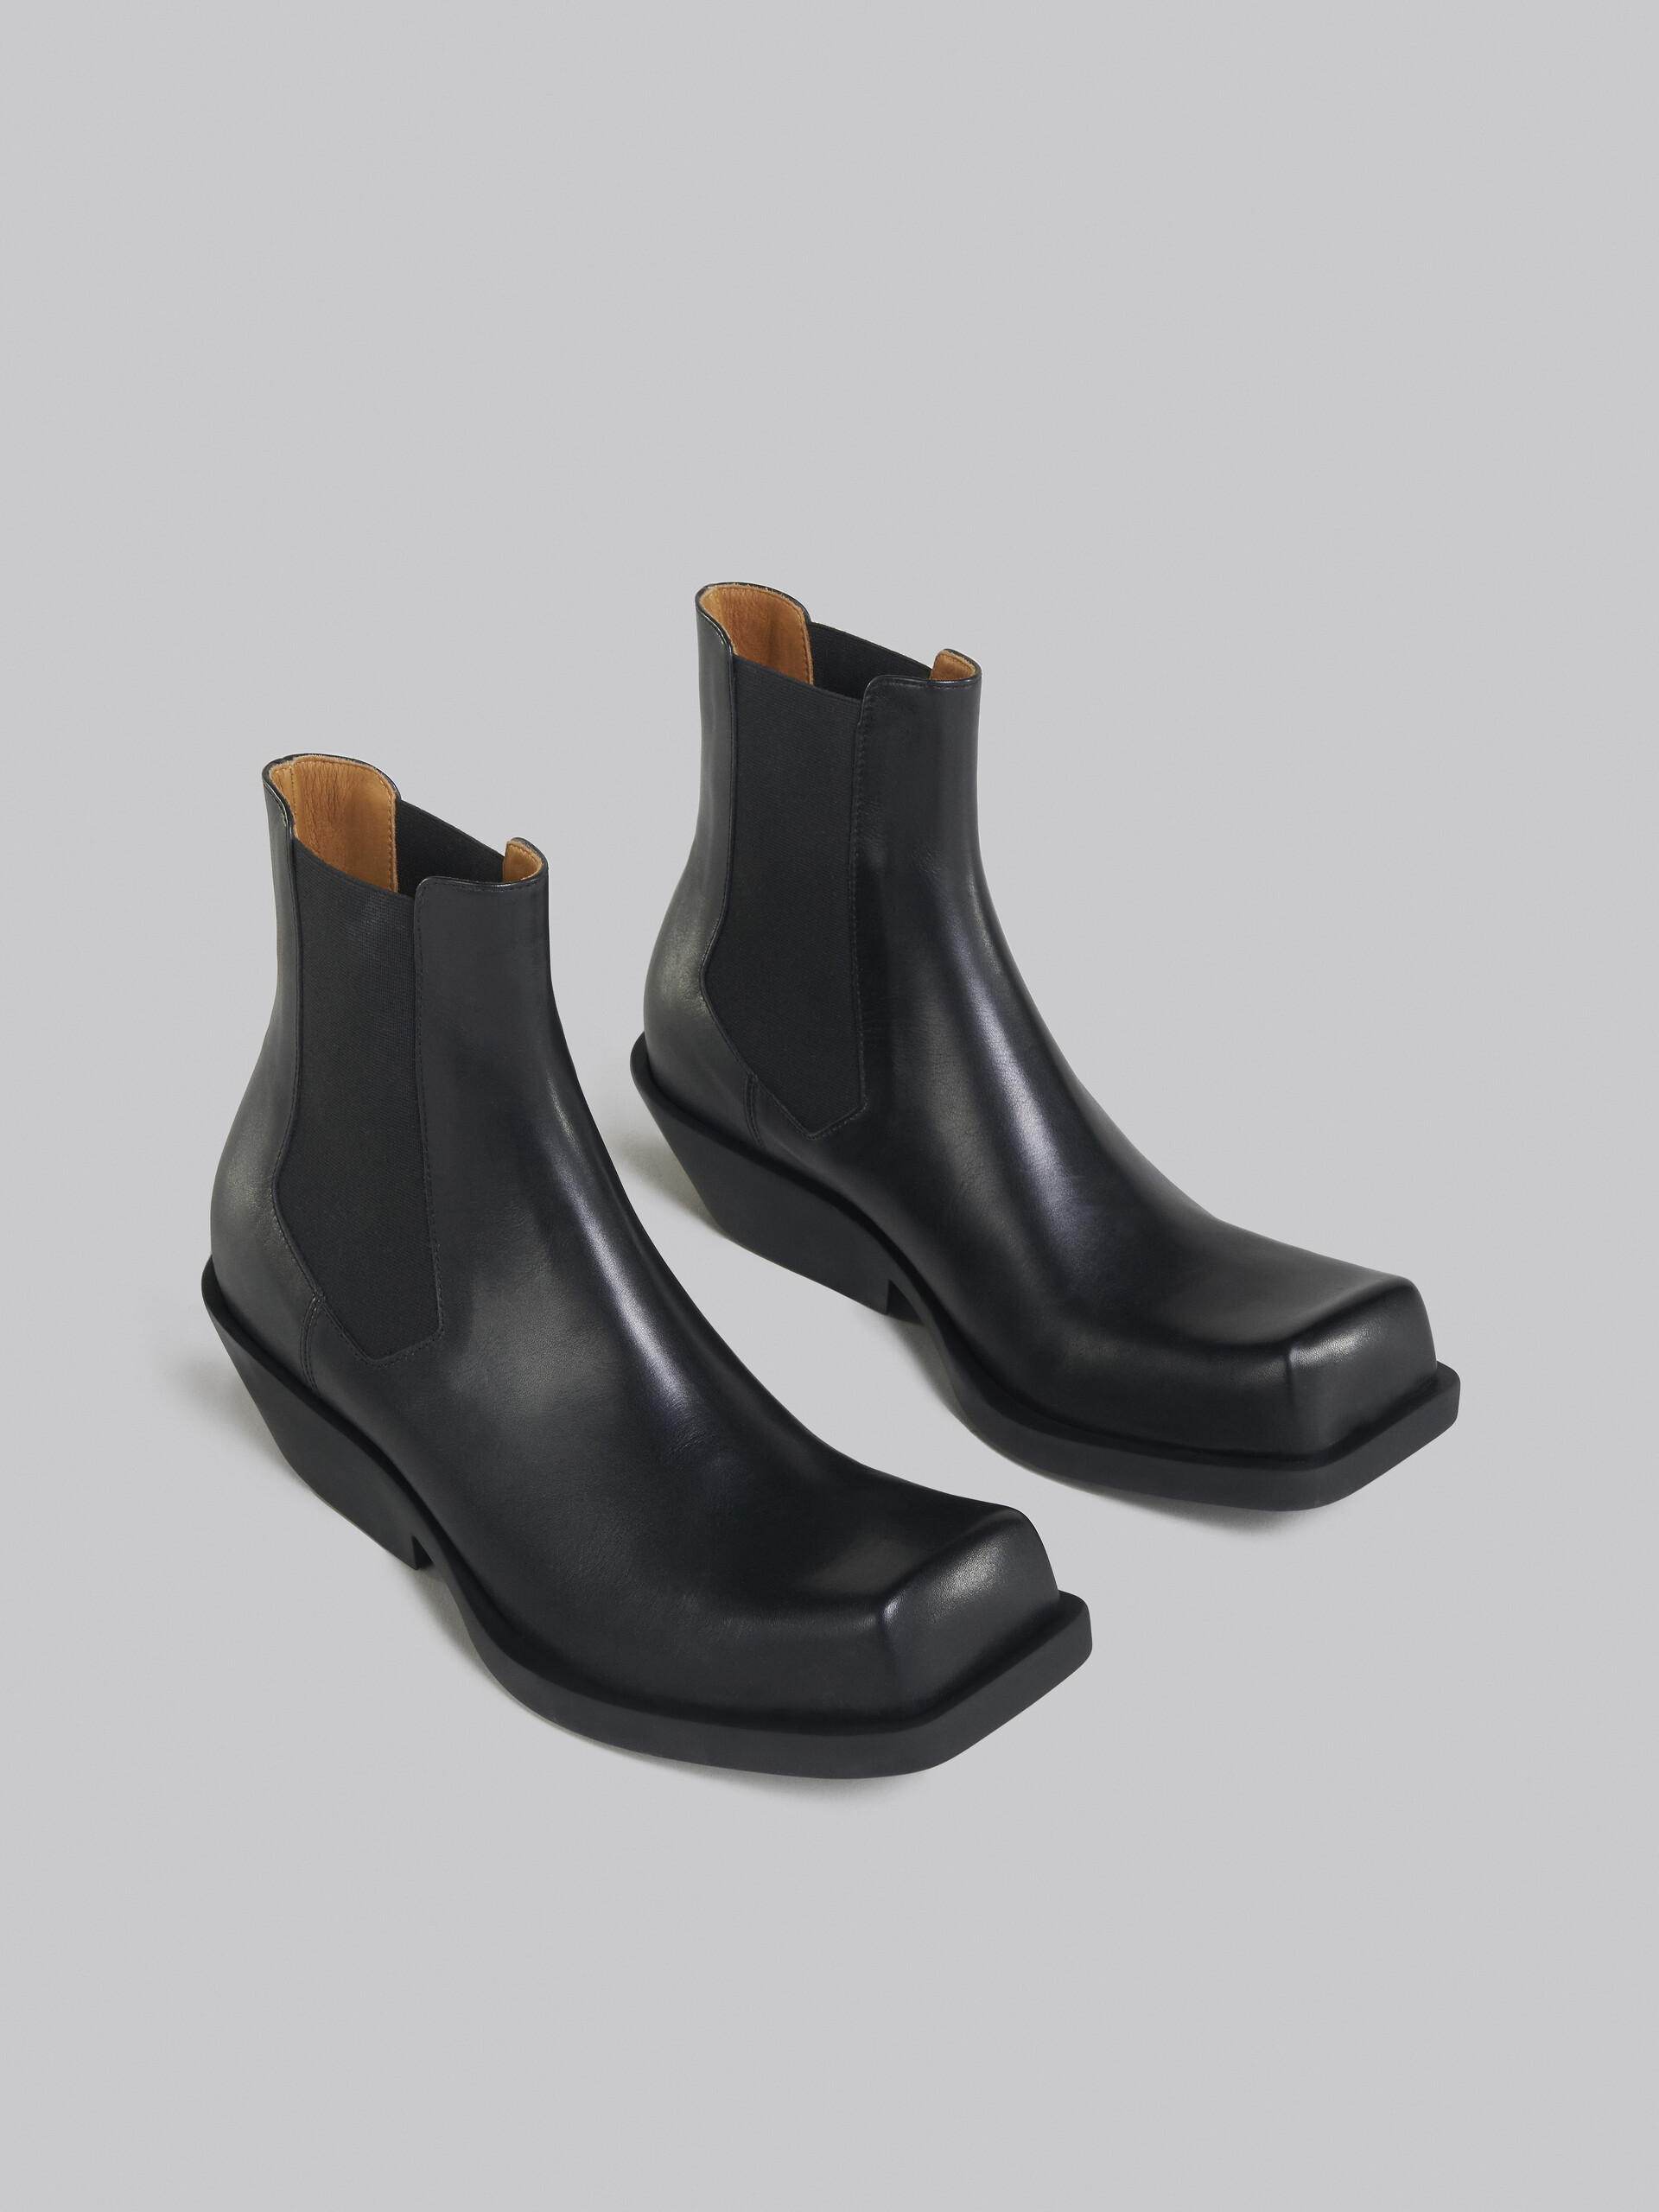 Black leather Chelsea boot - Boots - Image 4